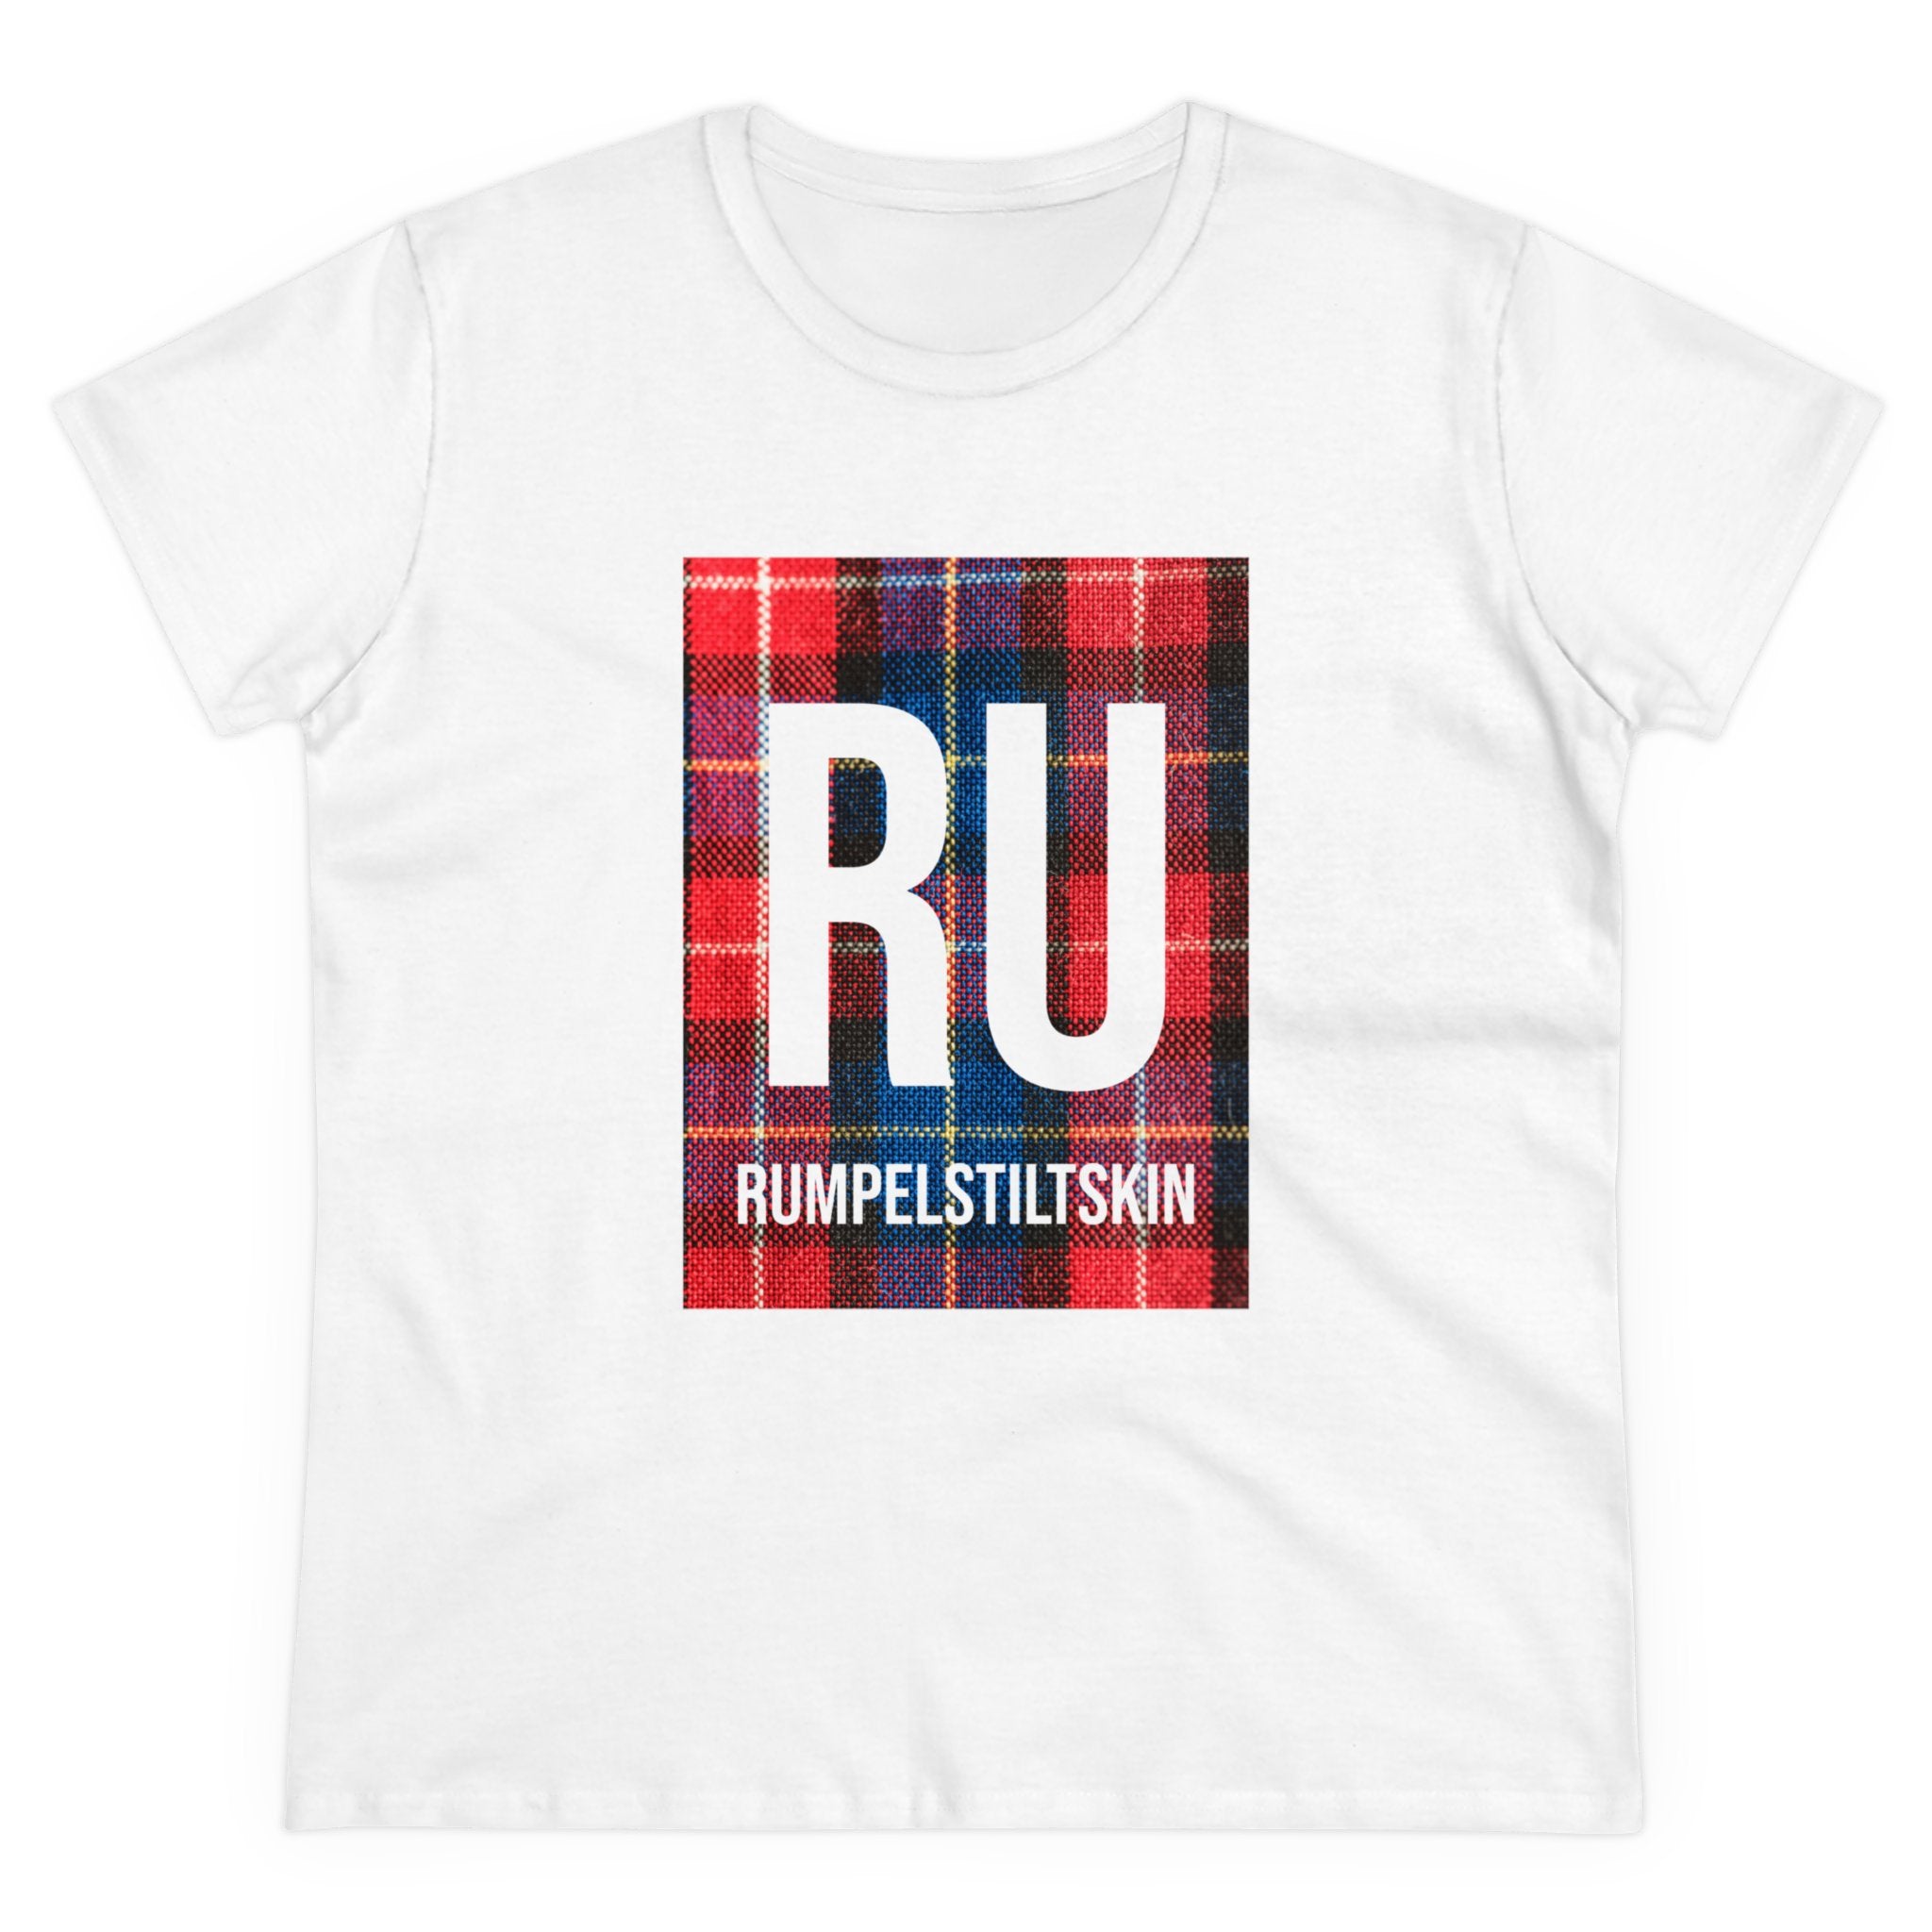 A **RU - Women's Tee** that features a large plaid rectangle with the letters "RU" and "RUMPELSTILTSKIN" written below it. Made from 100% US-grown cotton, this white T-shirt is also ethically made.